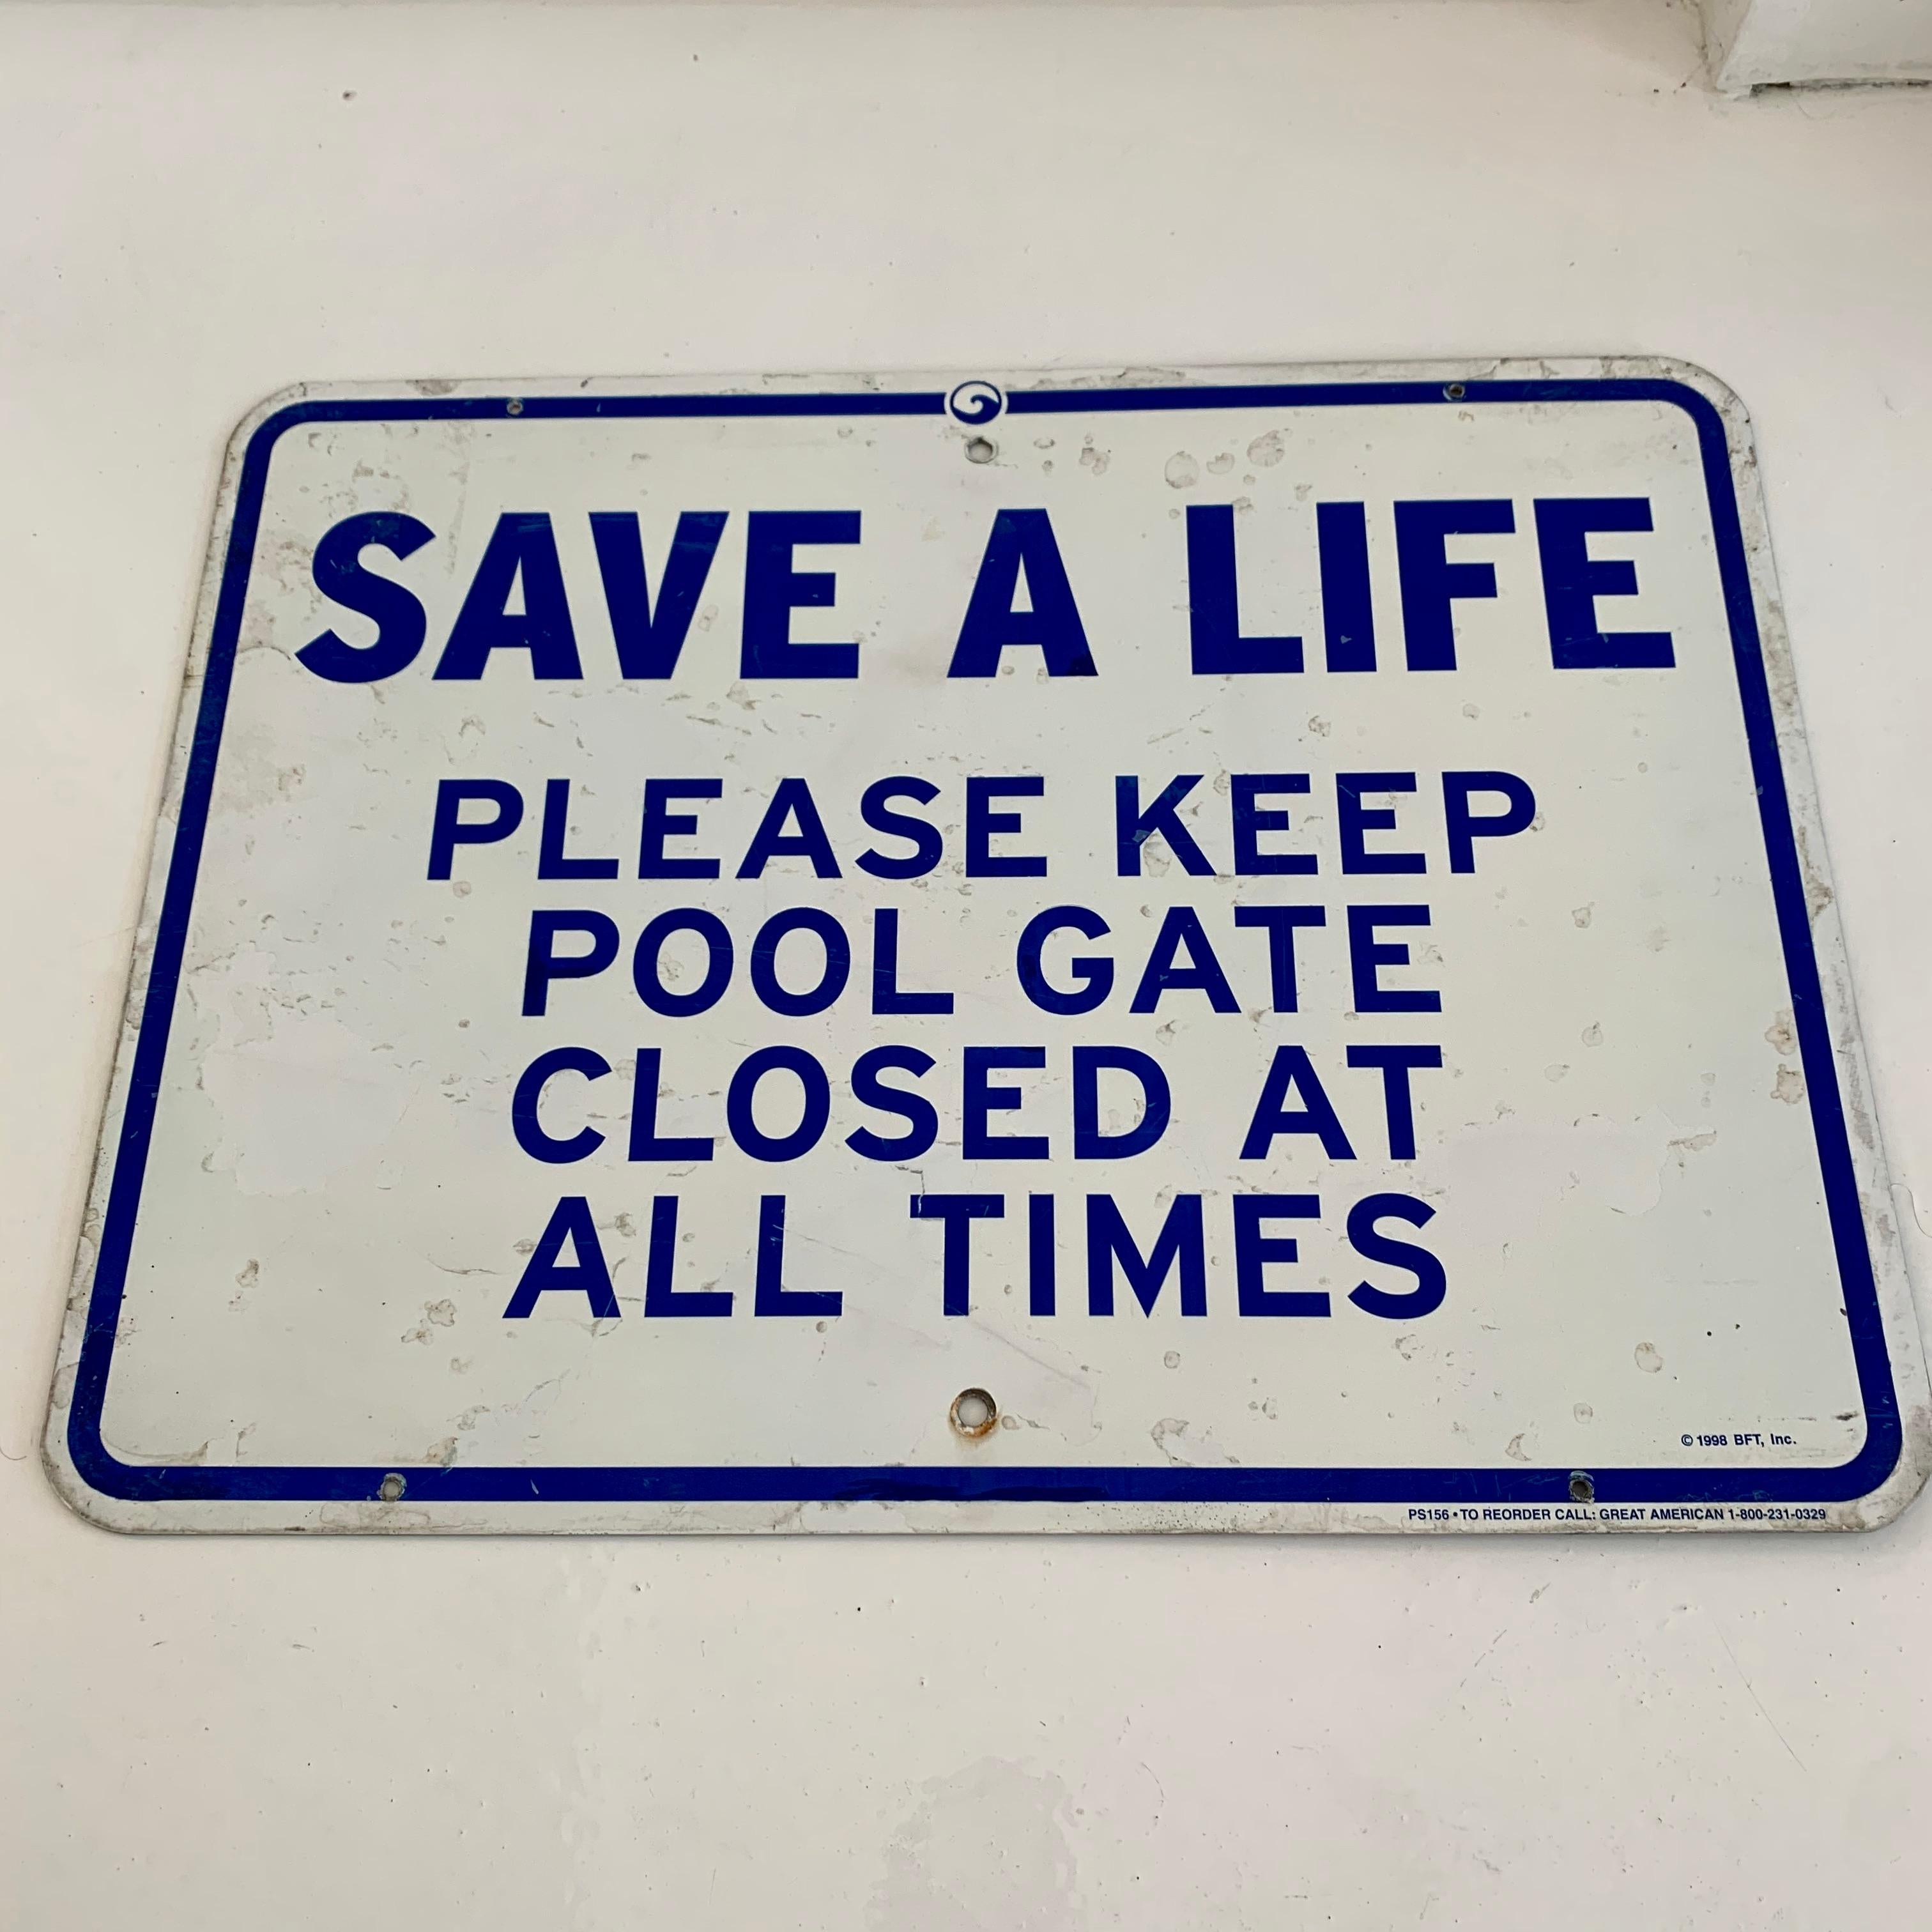 Vintage metal sign from a public pool. White sign with blue lettering. SAVE A LIFE. PLEASE KEEP POOL GATE CLOSED AT ALL TIMES. Good condition with some scratches.